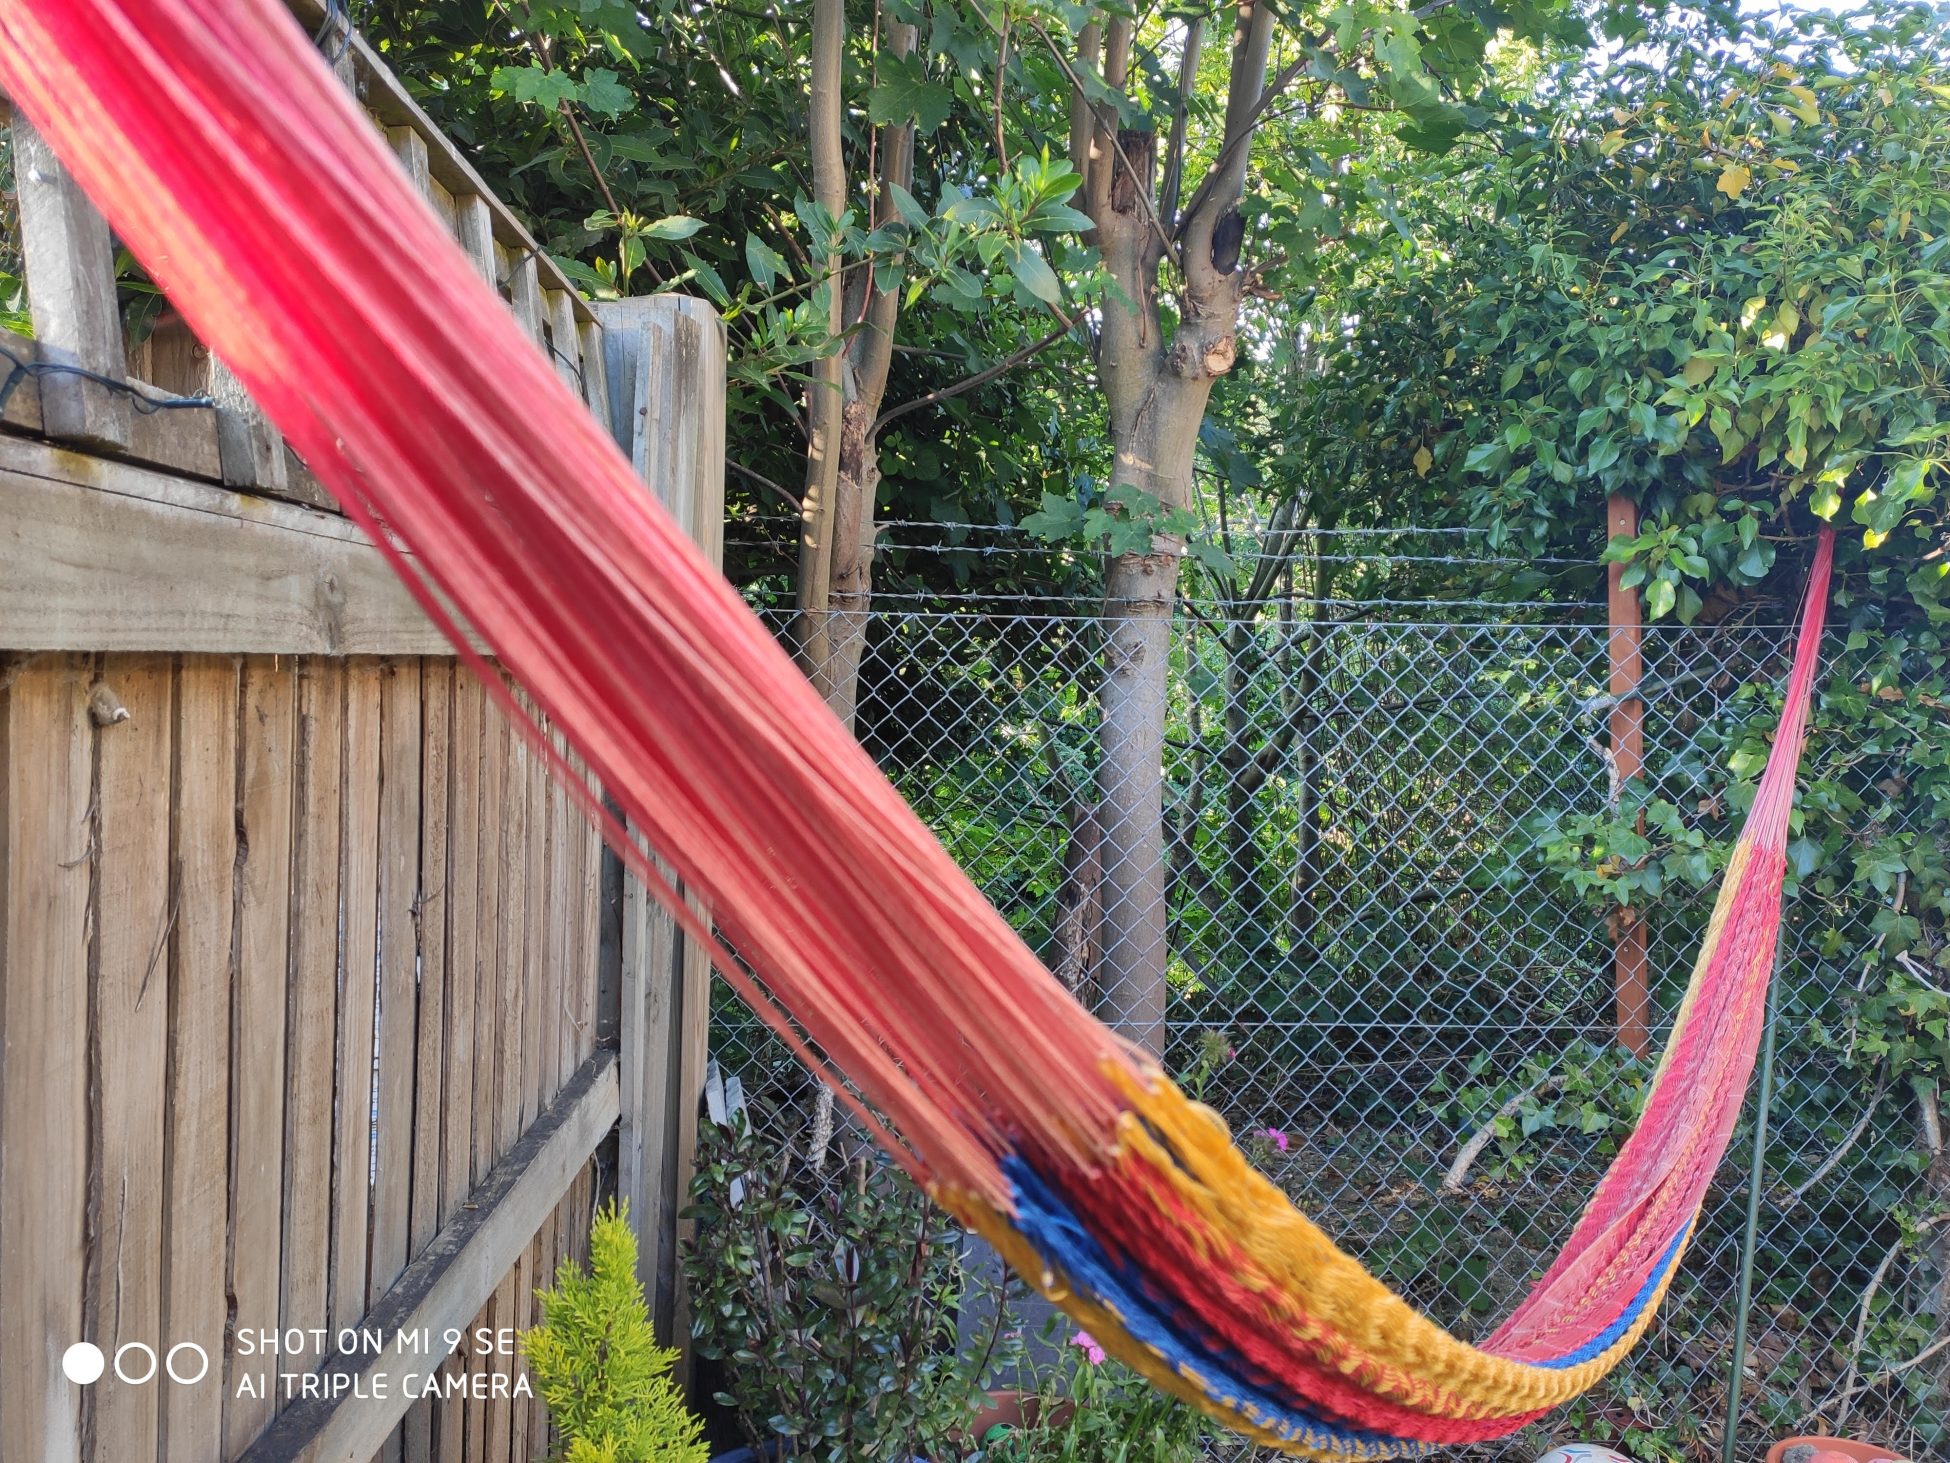 Brightly coloured hammock strung up between fence posts in a garden,